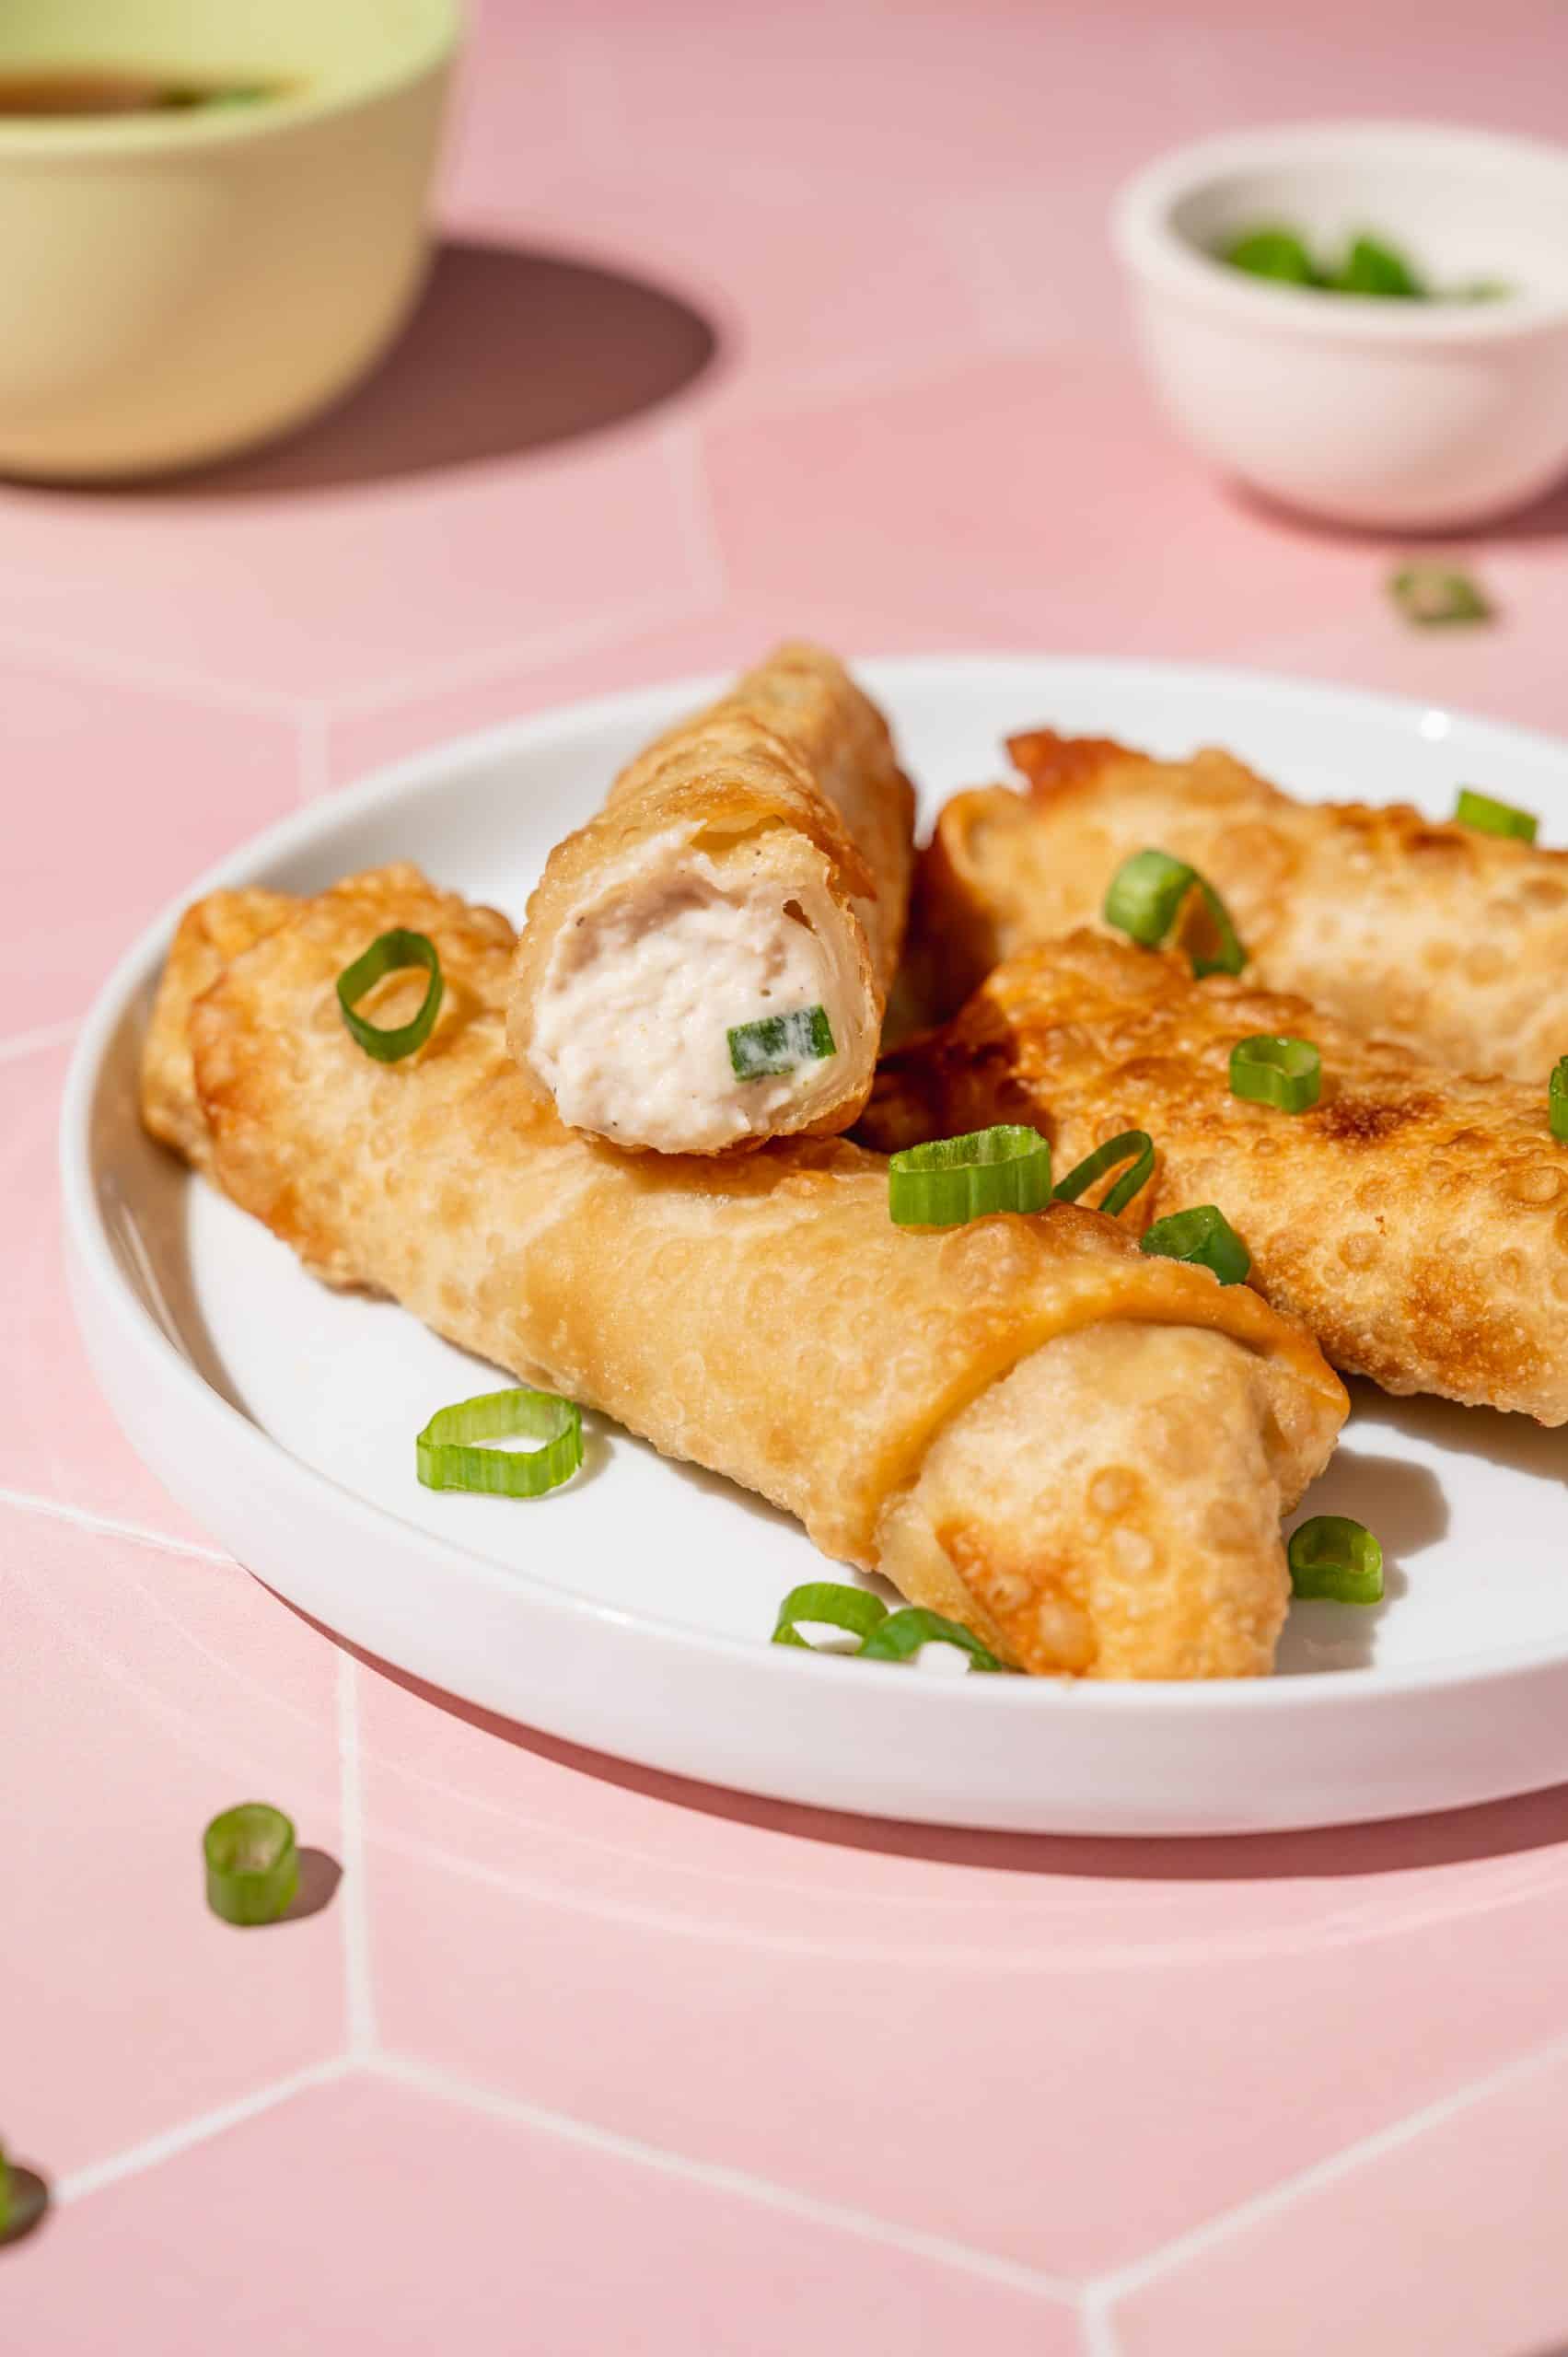 4 egg rolls on a white plate garnished with scallions, top one is sliced open to show crab rangoon filling